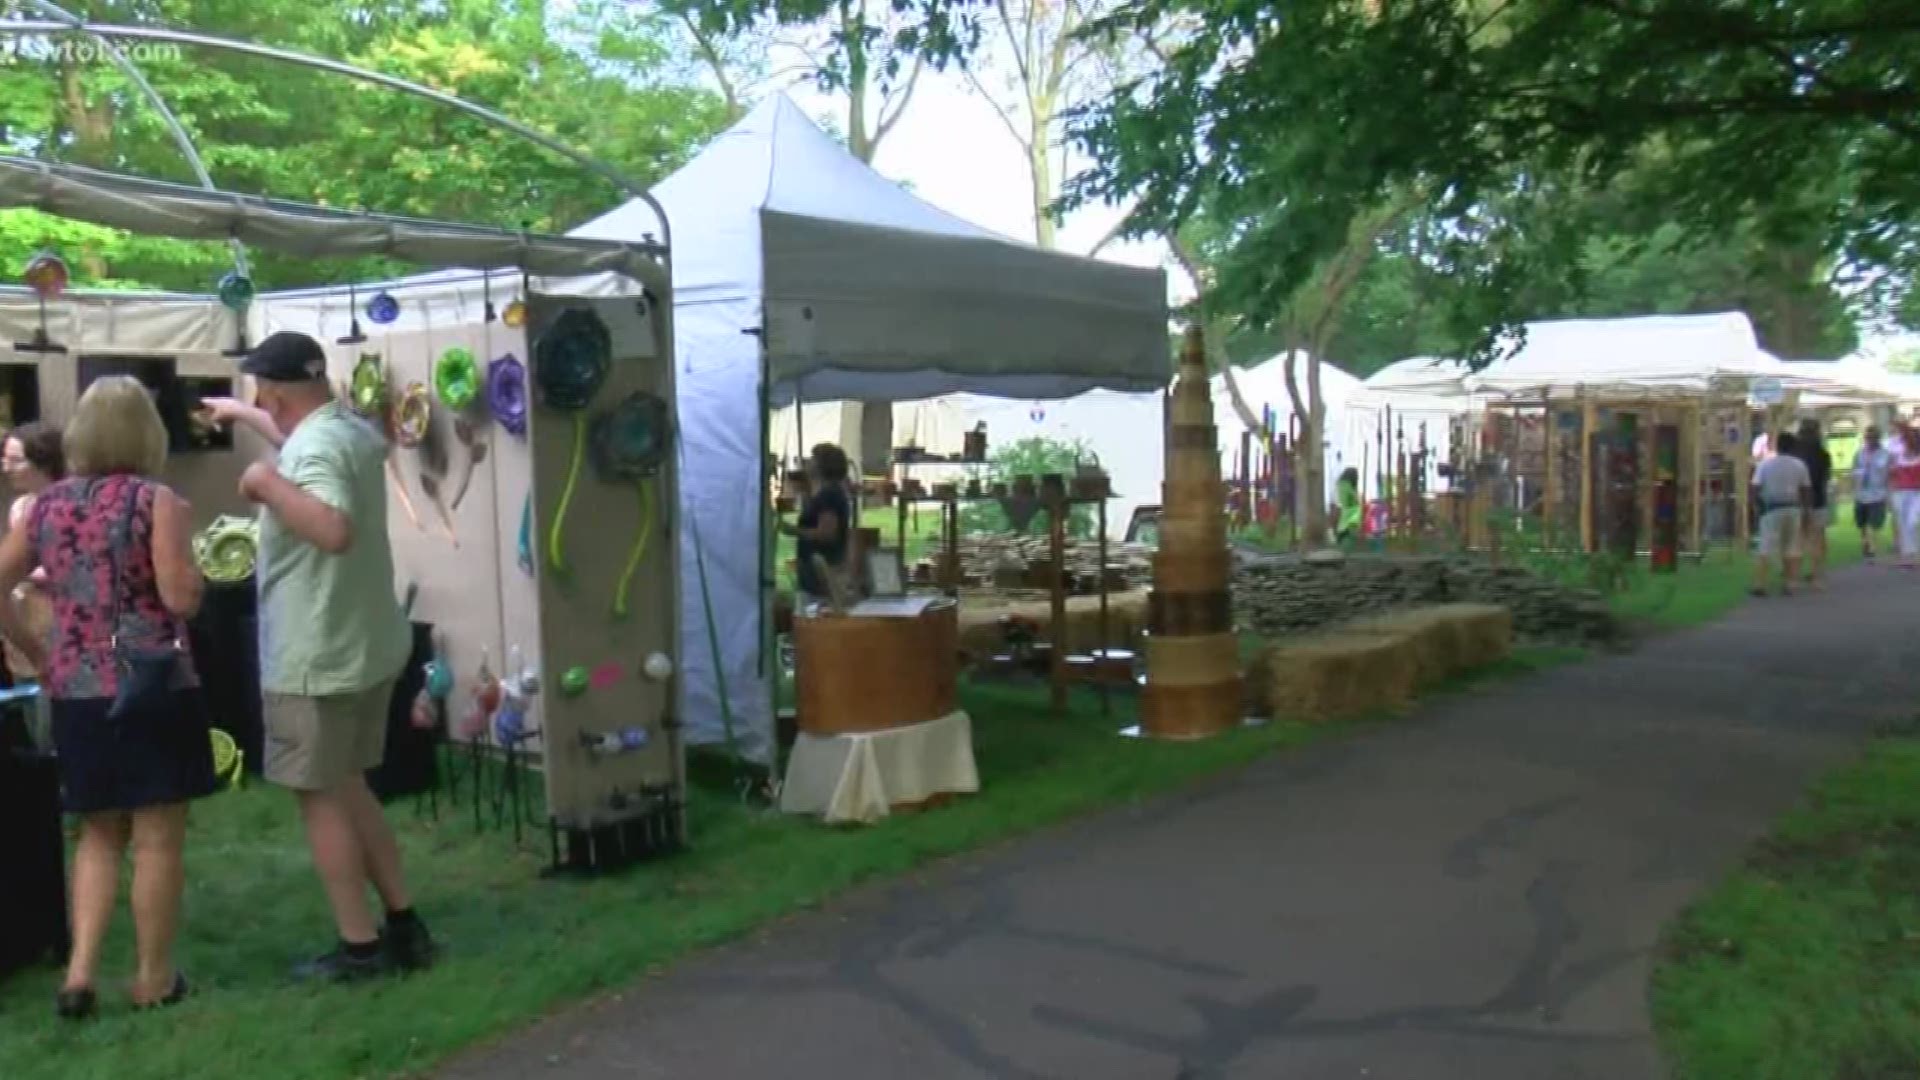 For 54 years, people have been enjoying Ohio's oldest outdoor juried art festival.